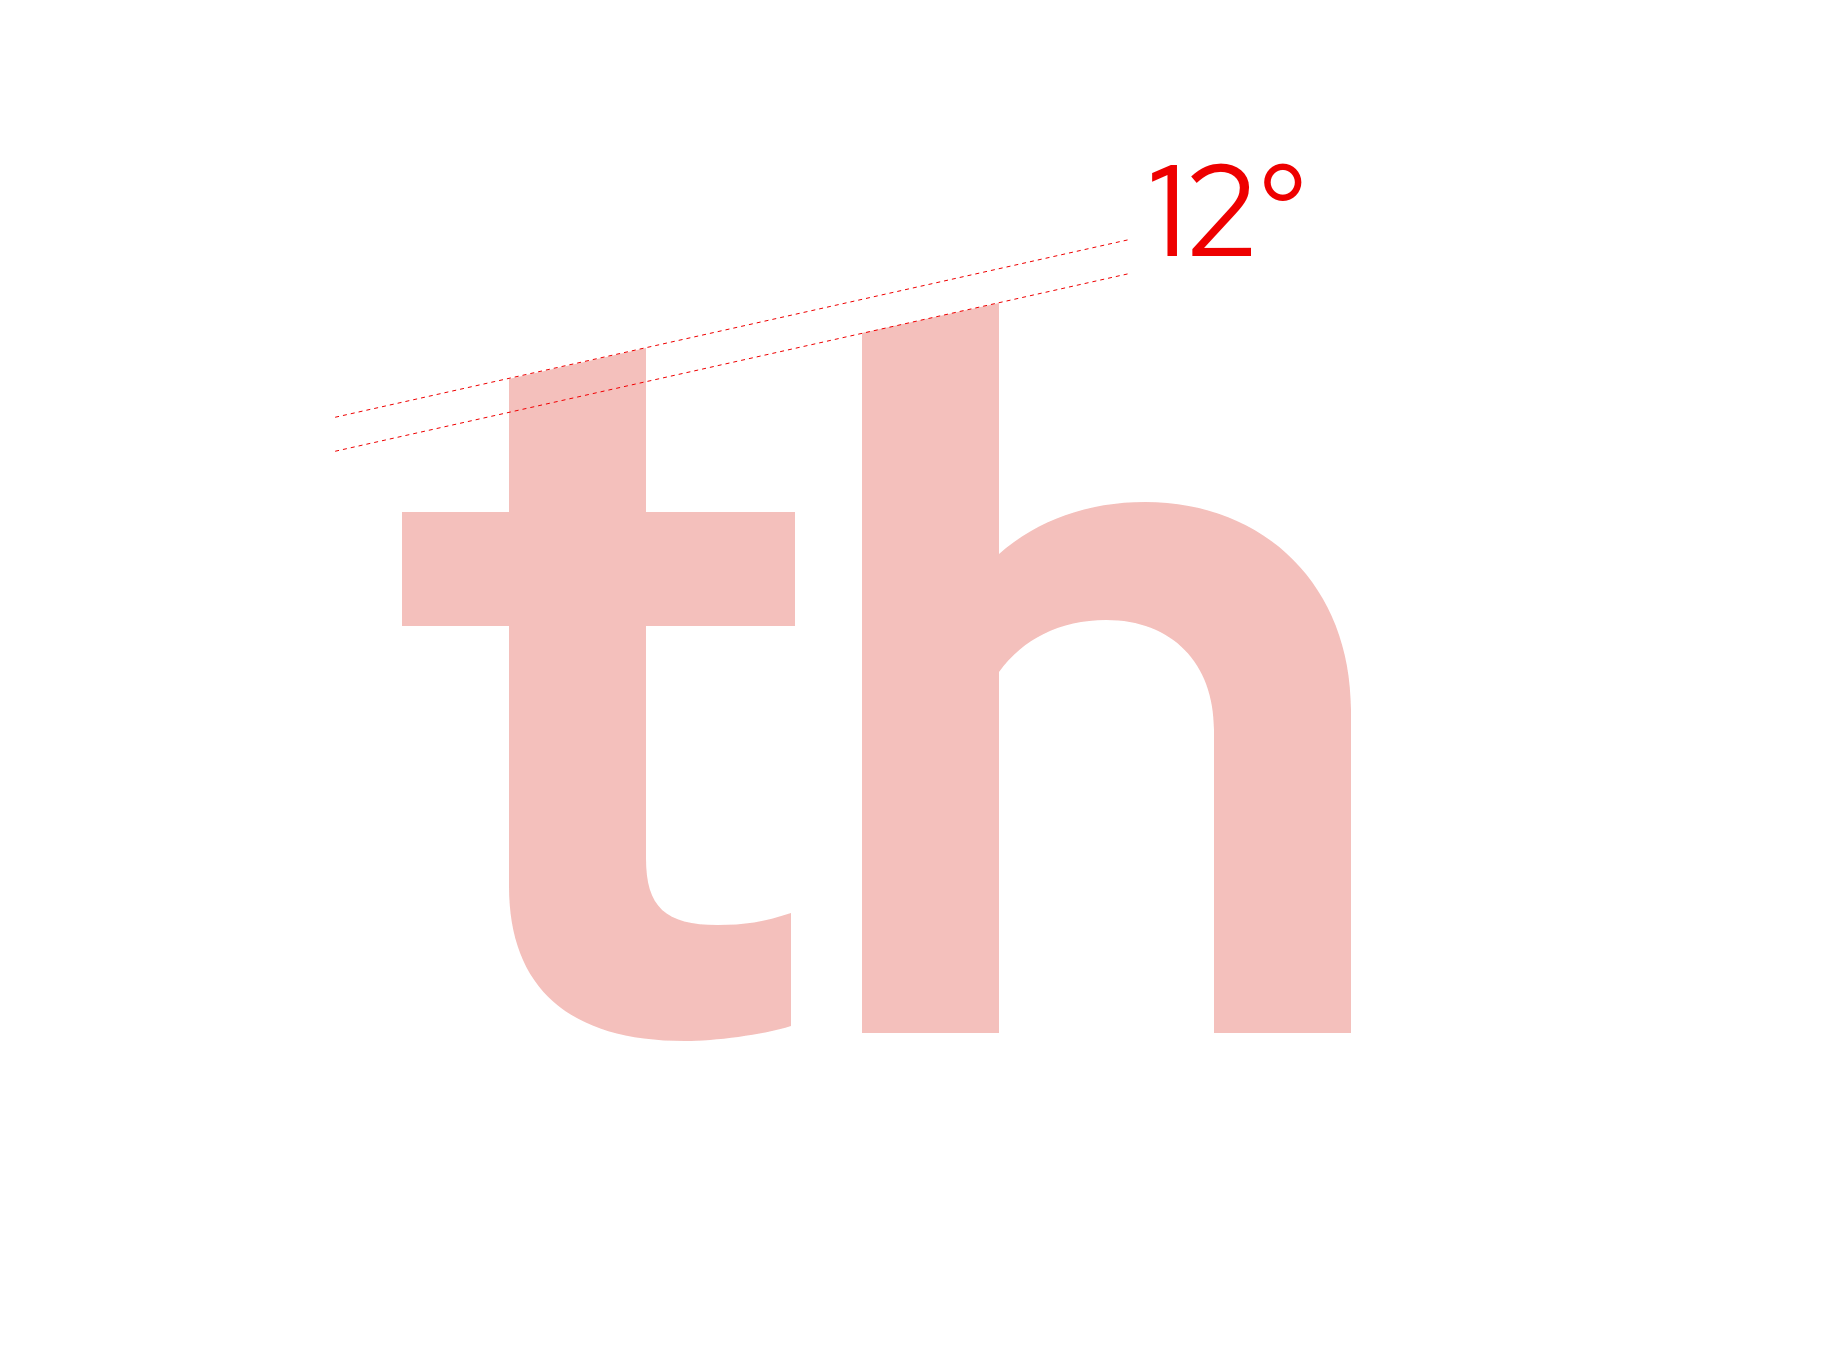 Illustration of 12 degree angle on text